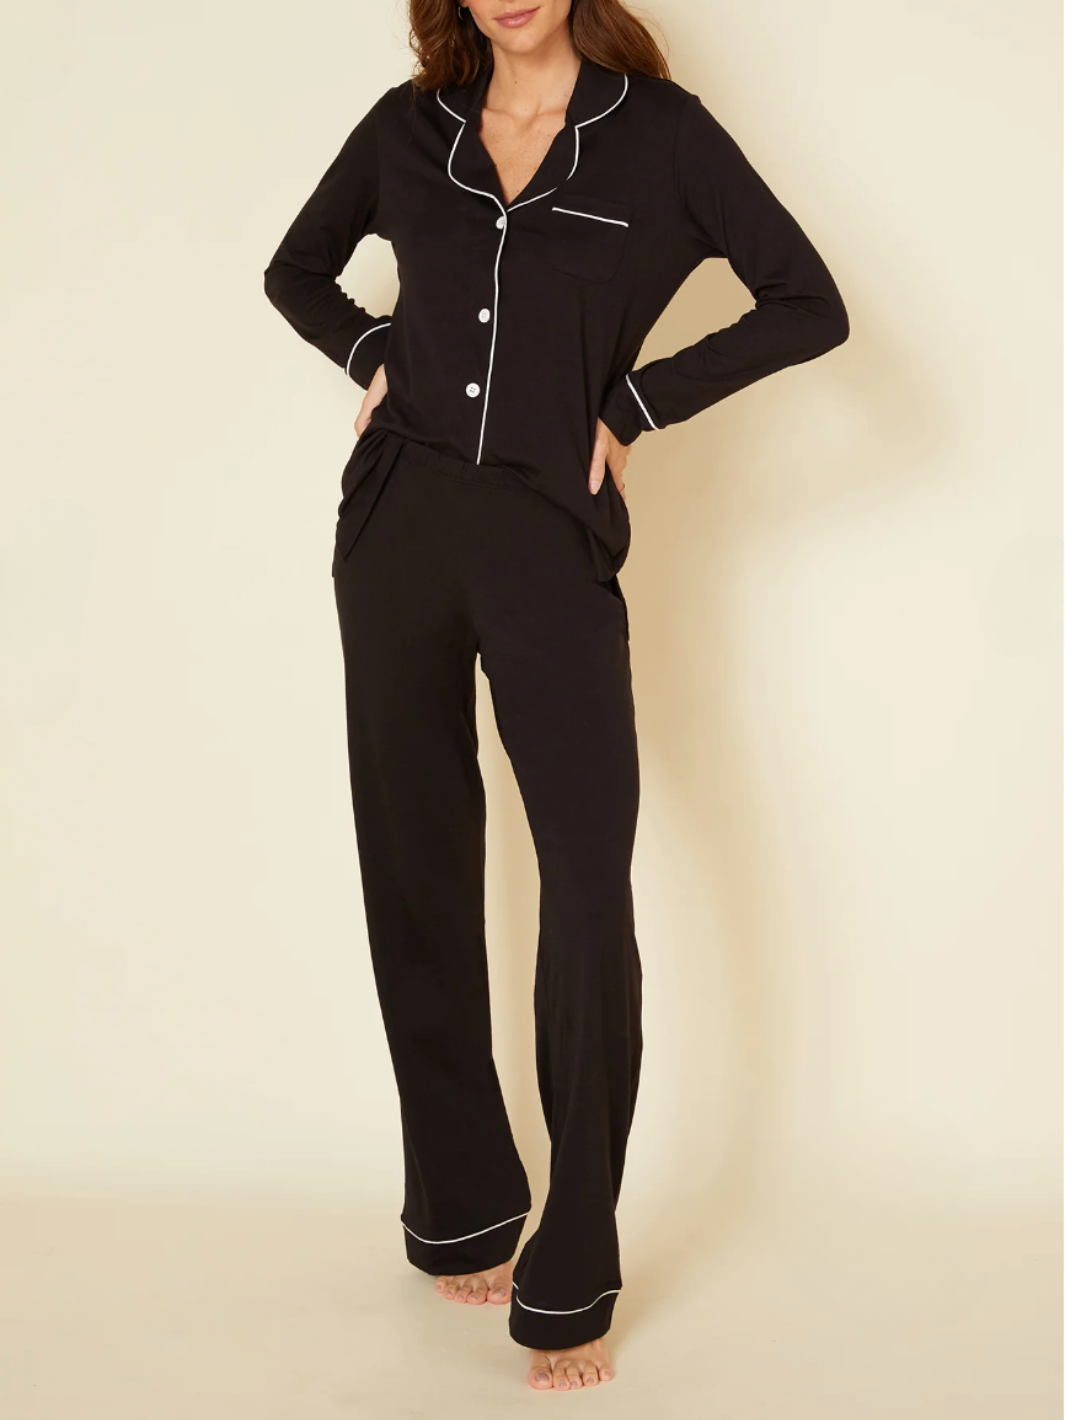 BELLA LONG SLEEVE TOP AND PANT PAJAMA SET IN BLACK / IVORY - Romi Boutique